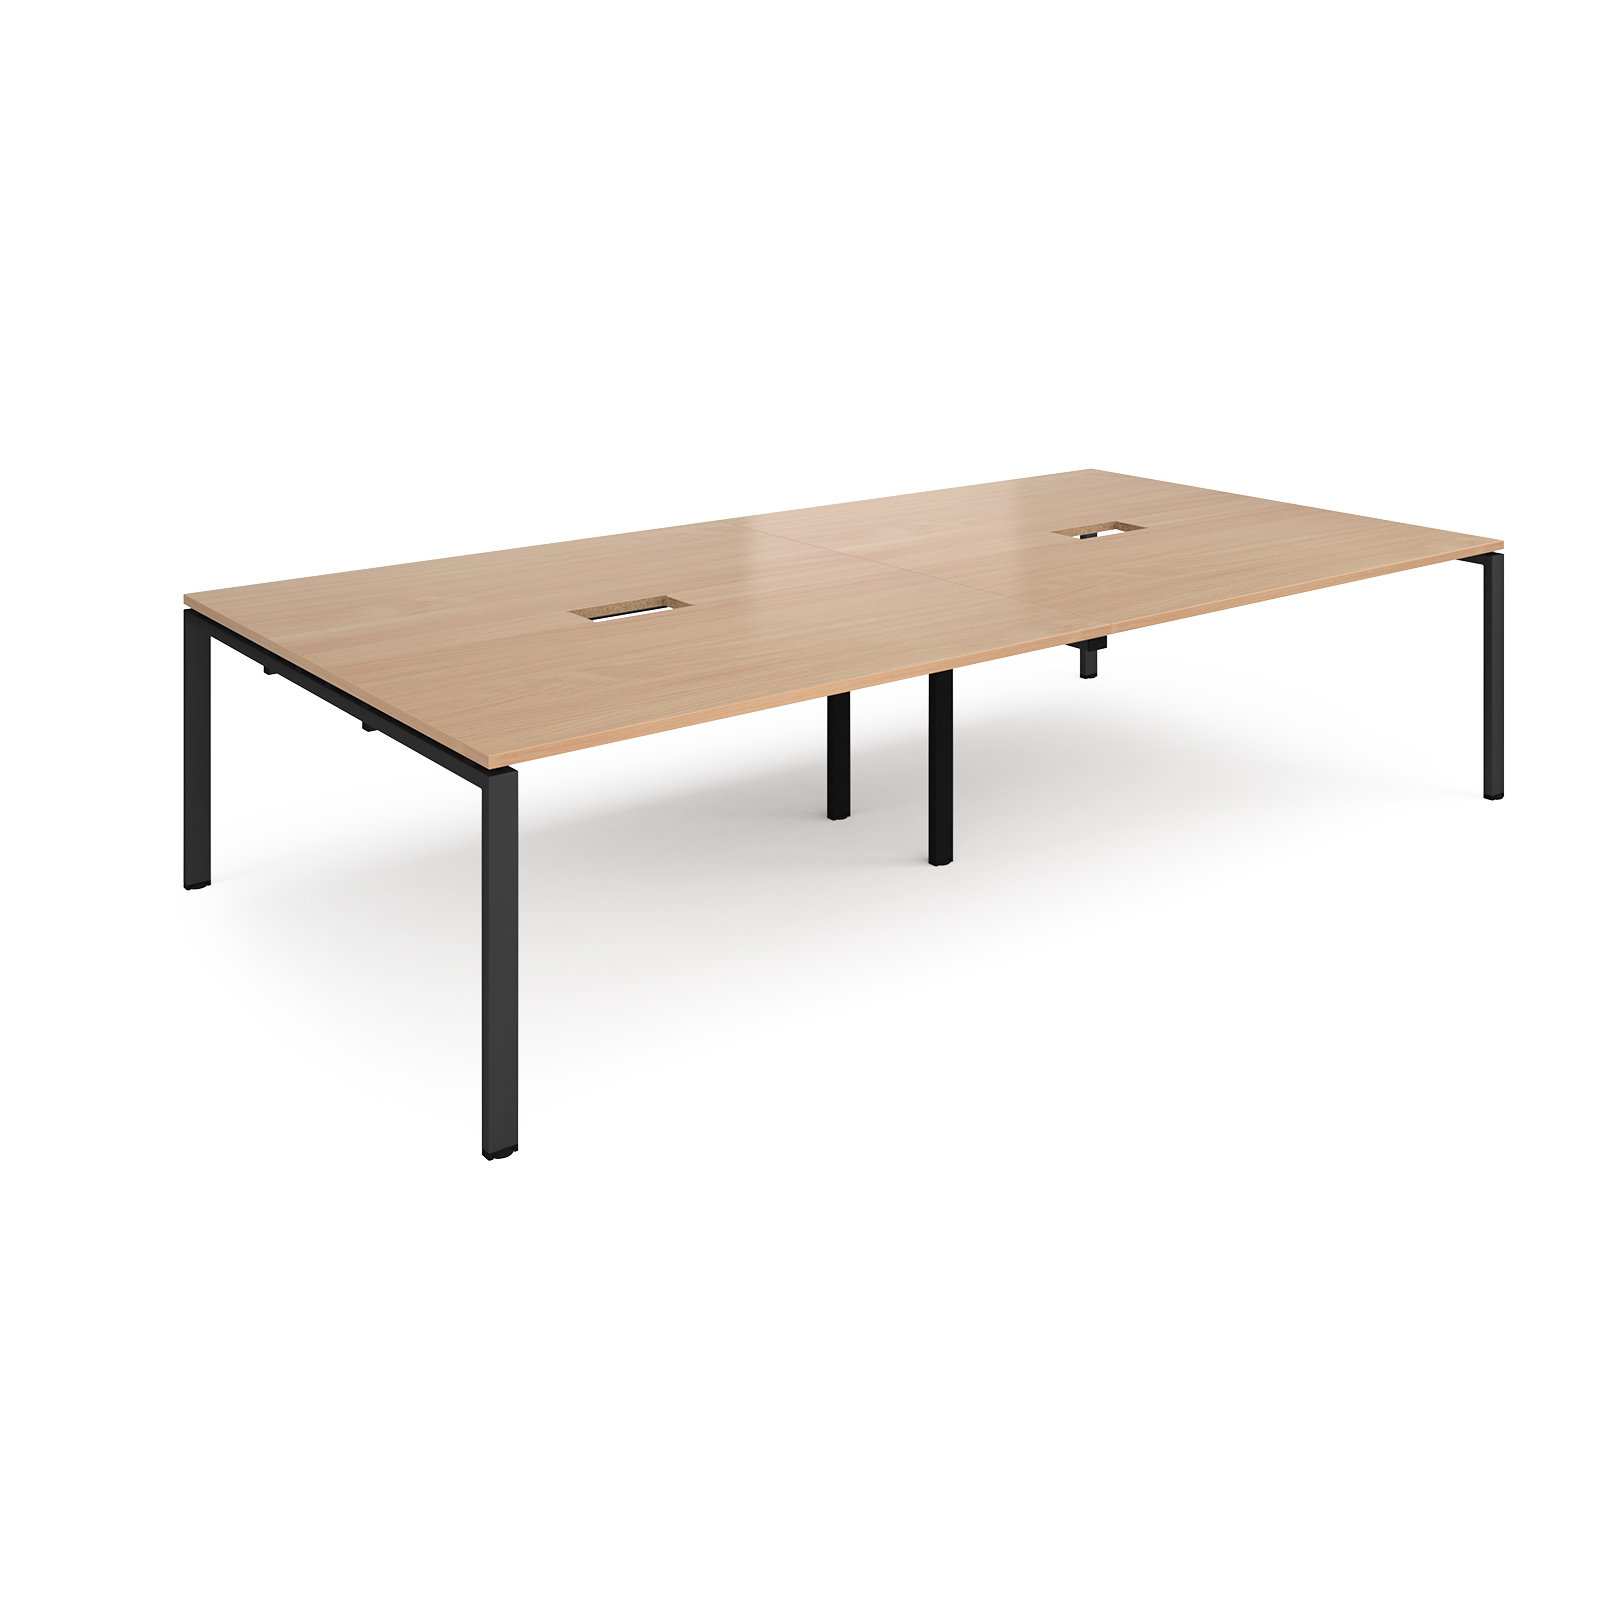 Adapt rectangular boardroom table 3200mm x 1600mm with 2 cutouts 272mm x 132mm - black frame, beech top